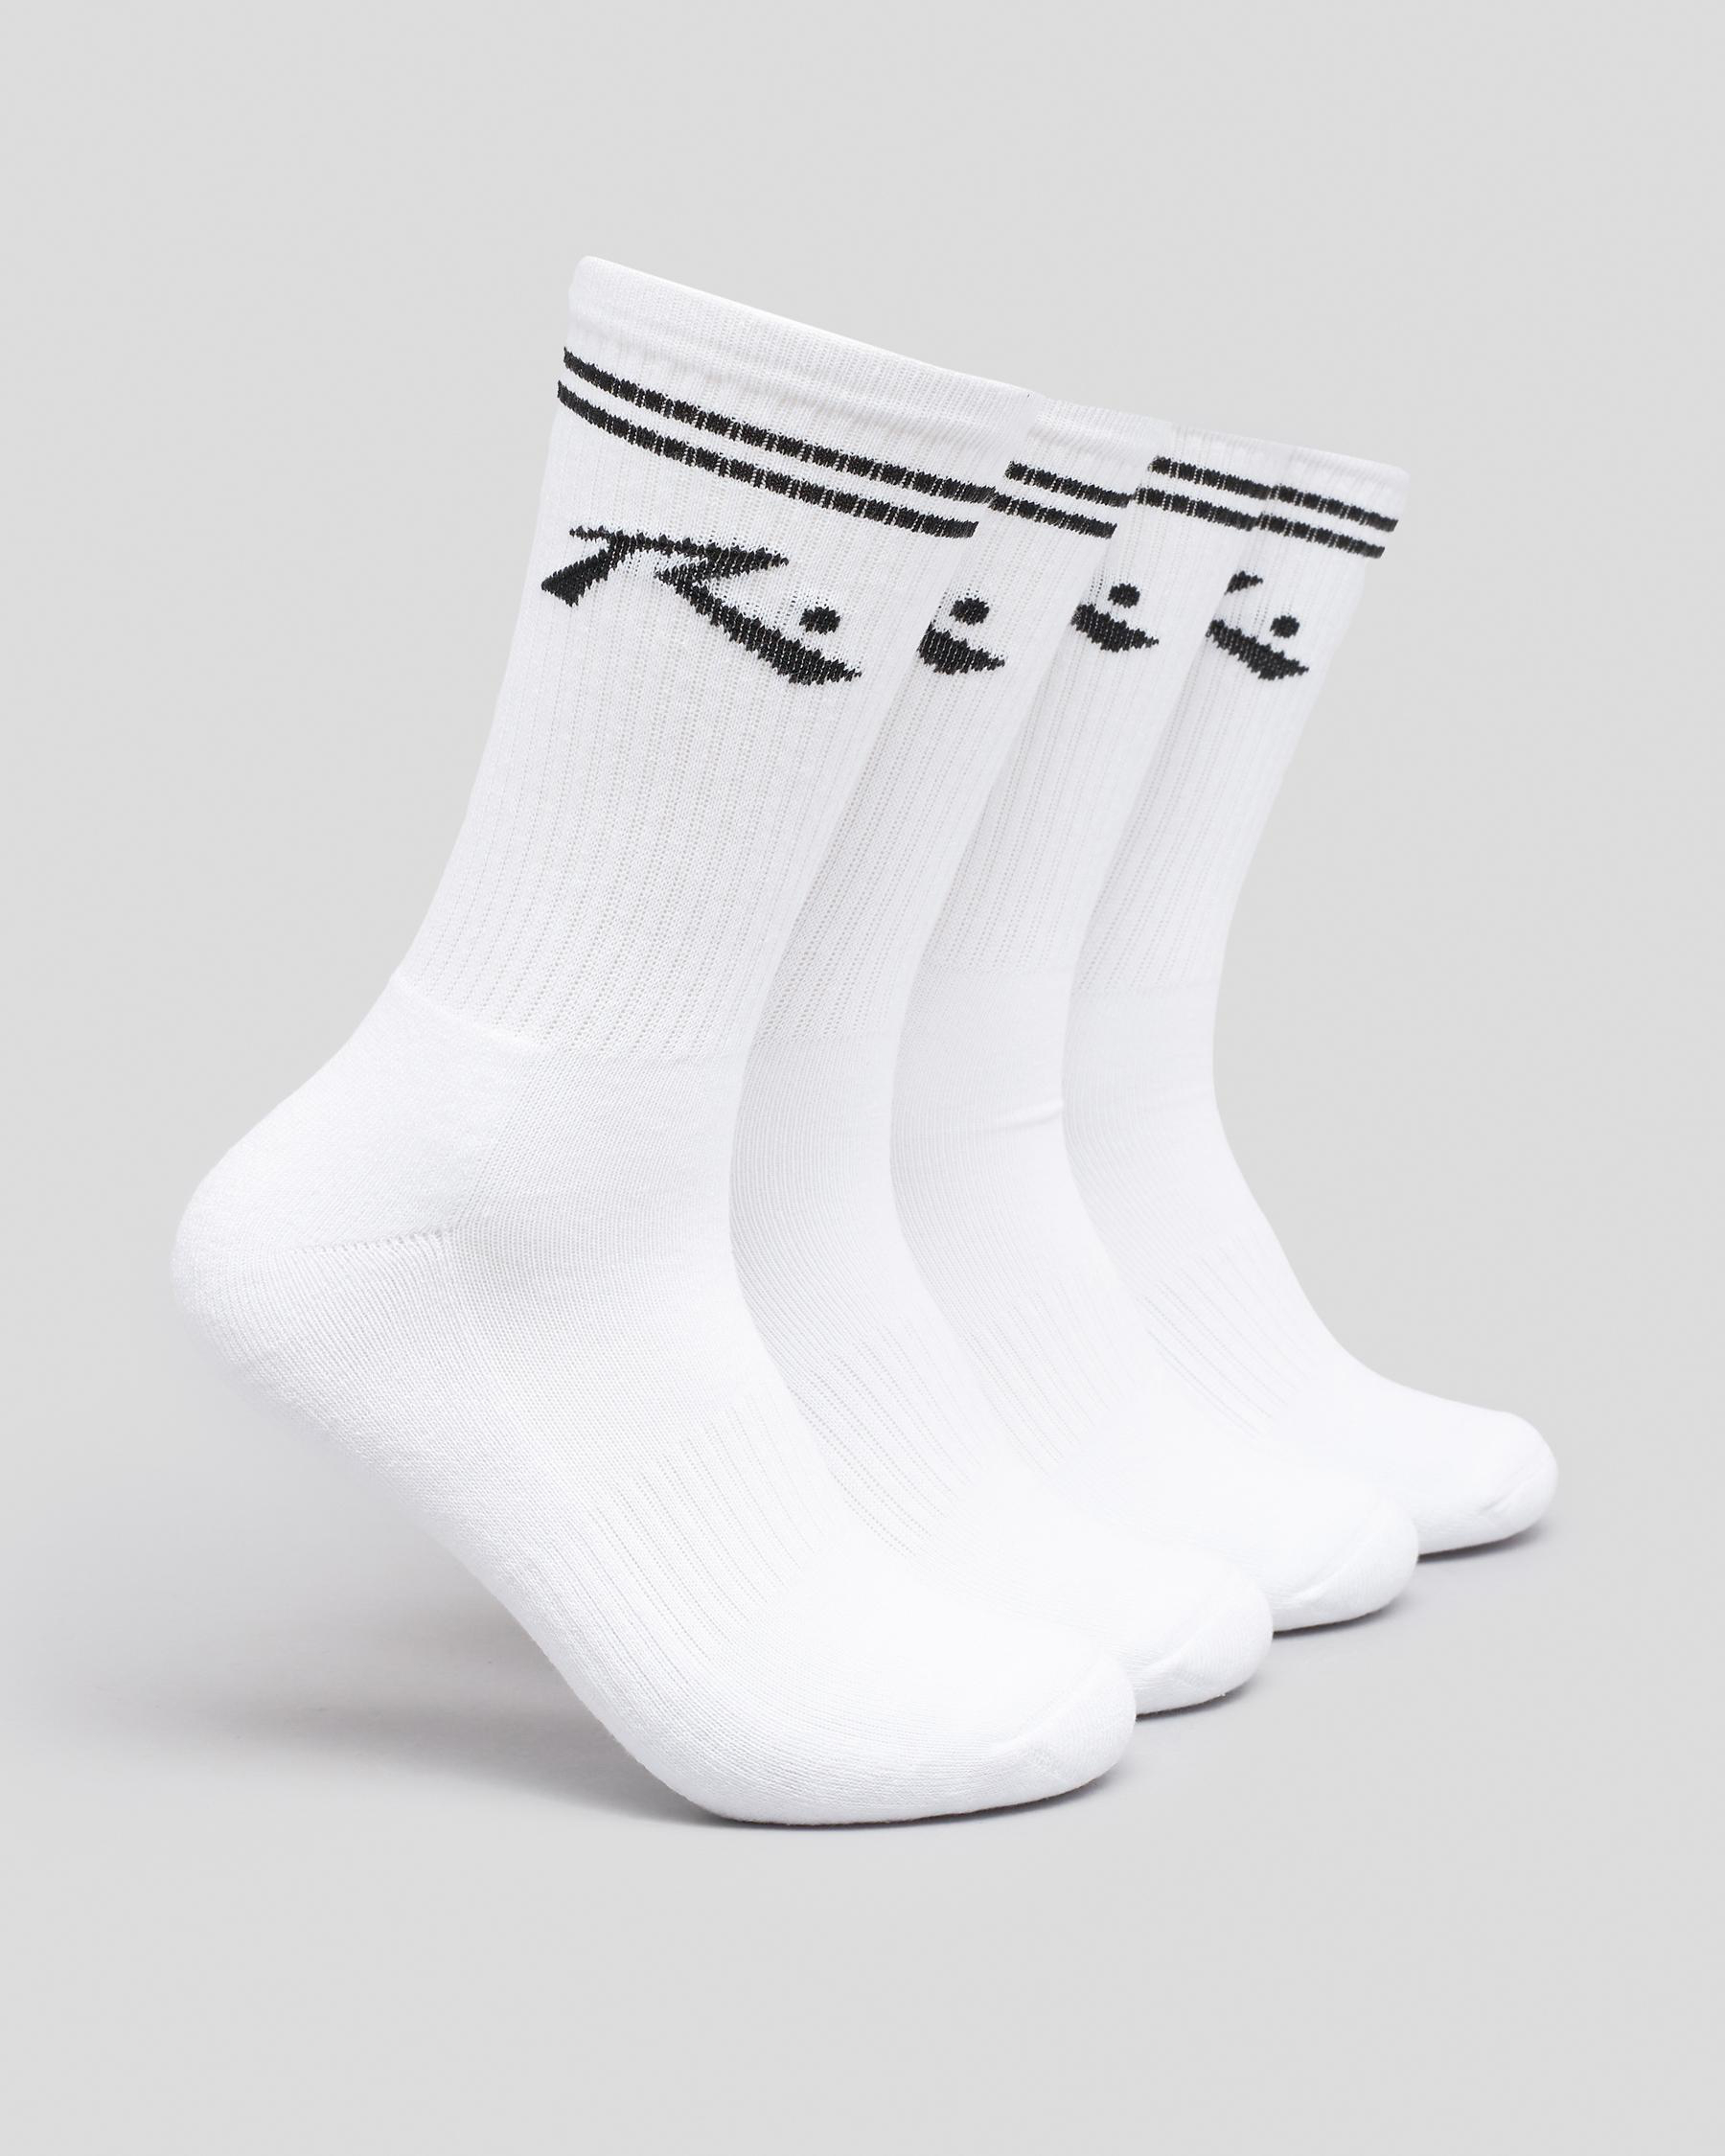 Shop Rusty Comp Mid Calf Socks 4 Pack In White - Fast Shipping & Easy ...